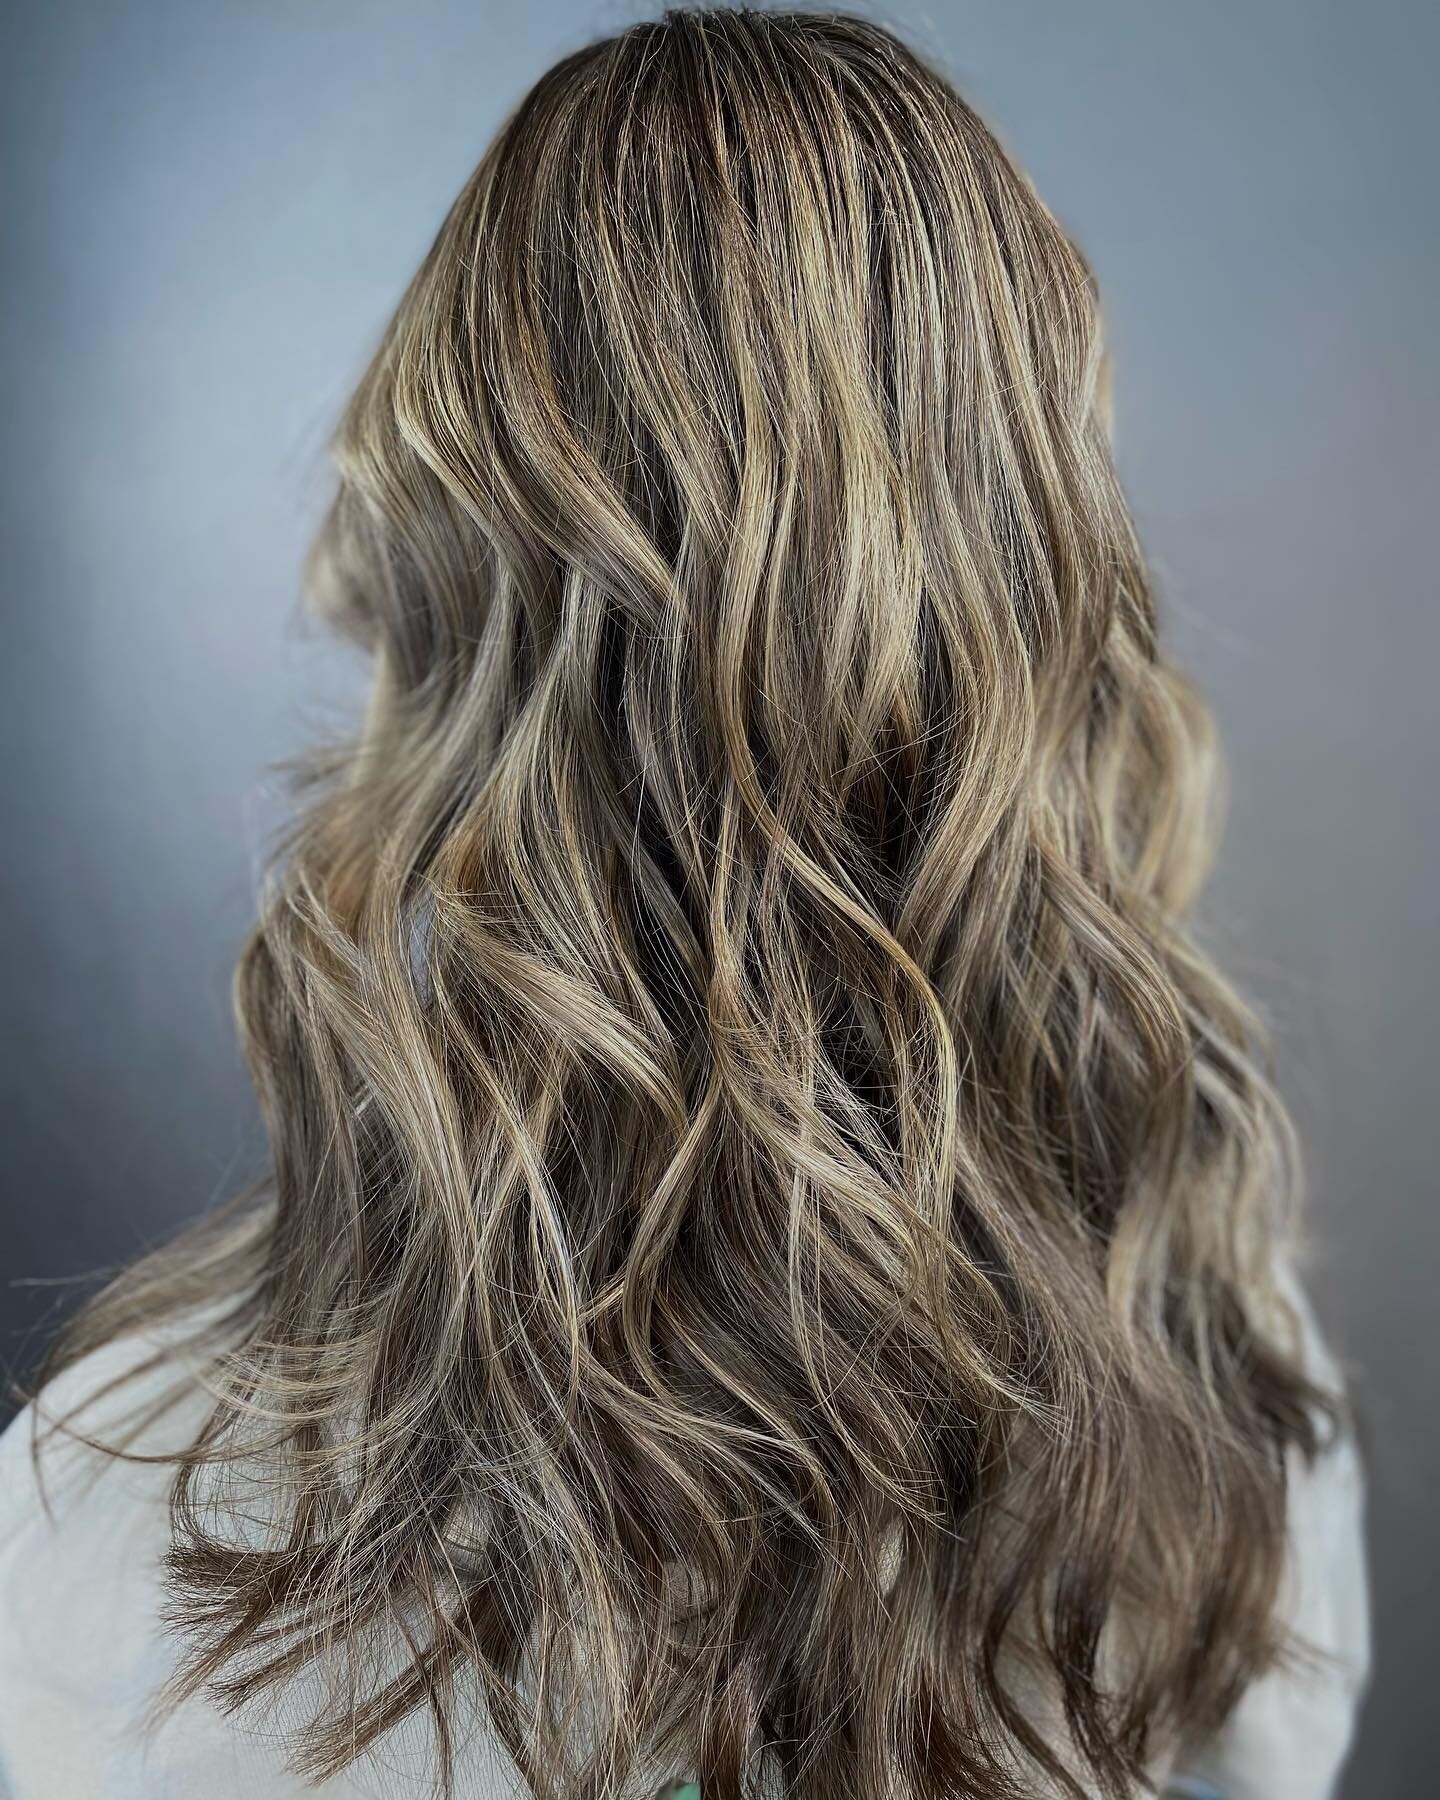 Coffee tones meet sunlit sweetness in these brown locks with honey highlights. ☕🍯 #SunlitBrunette #marylandstylist #linthicumheights